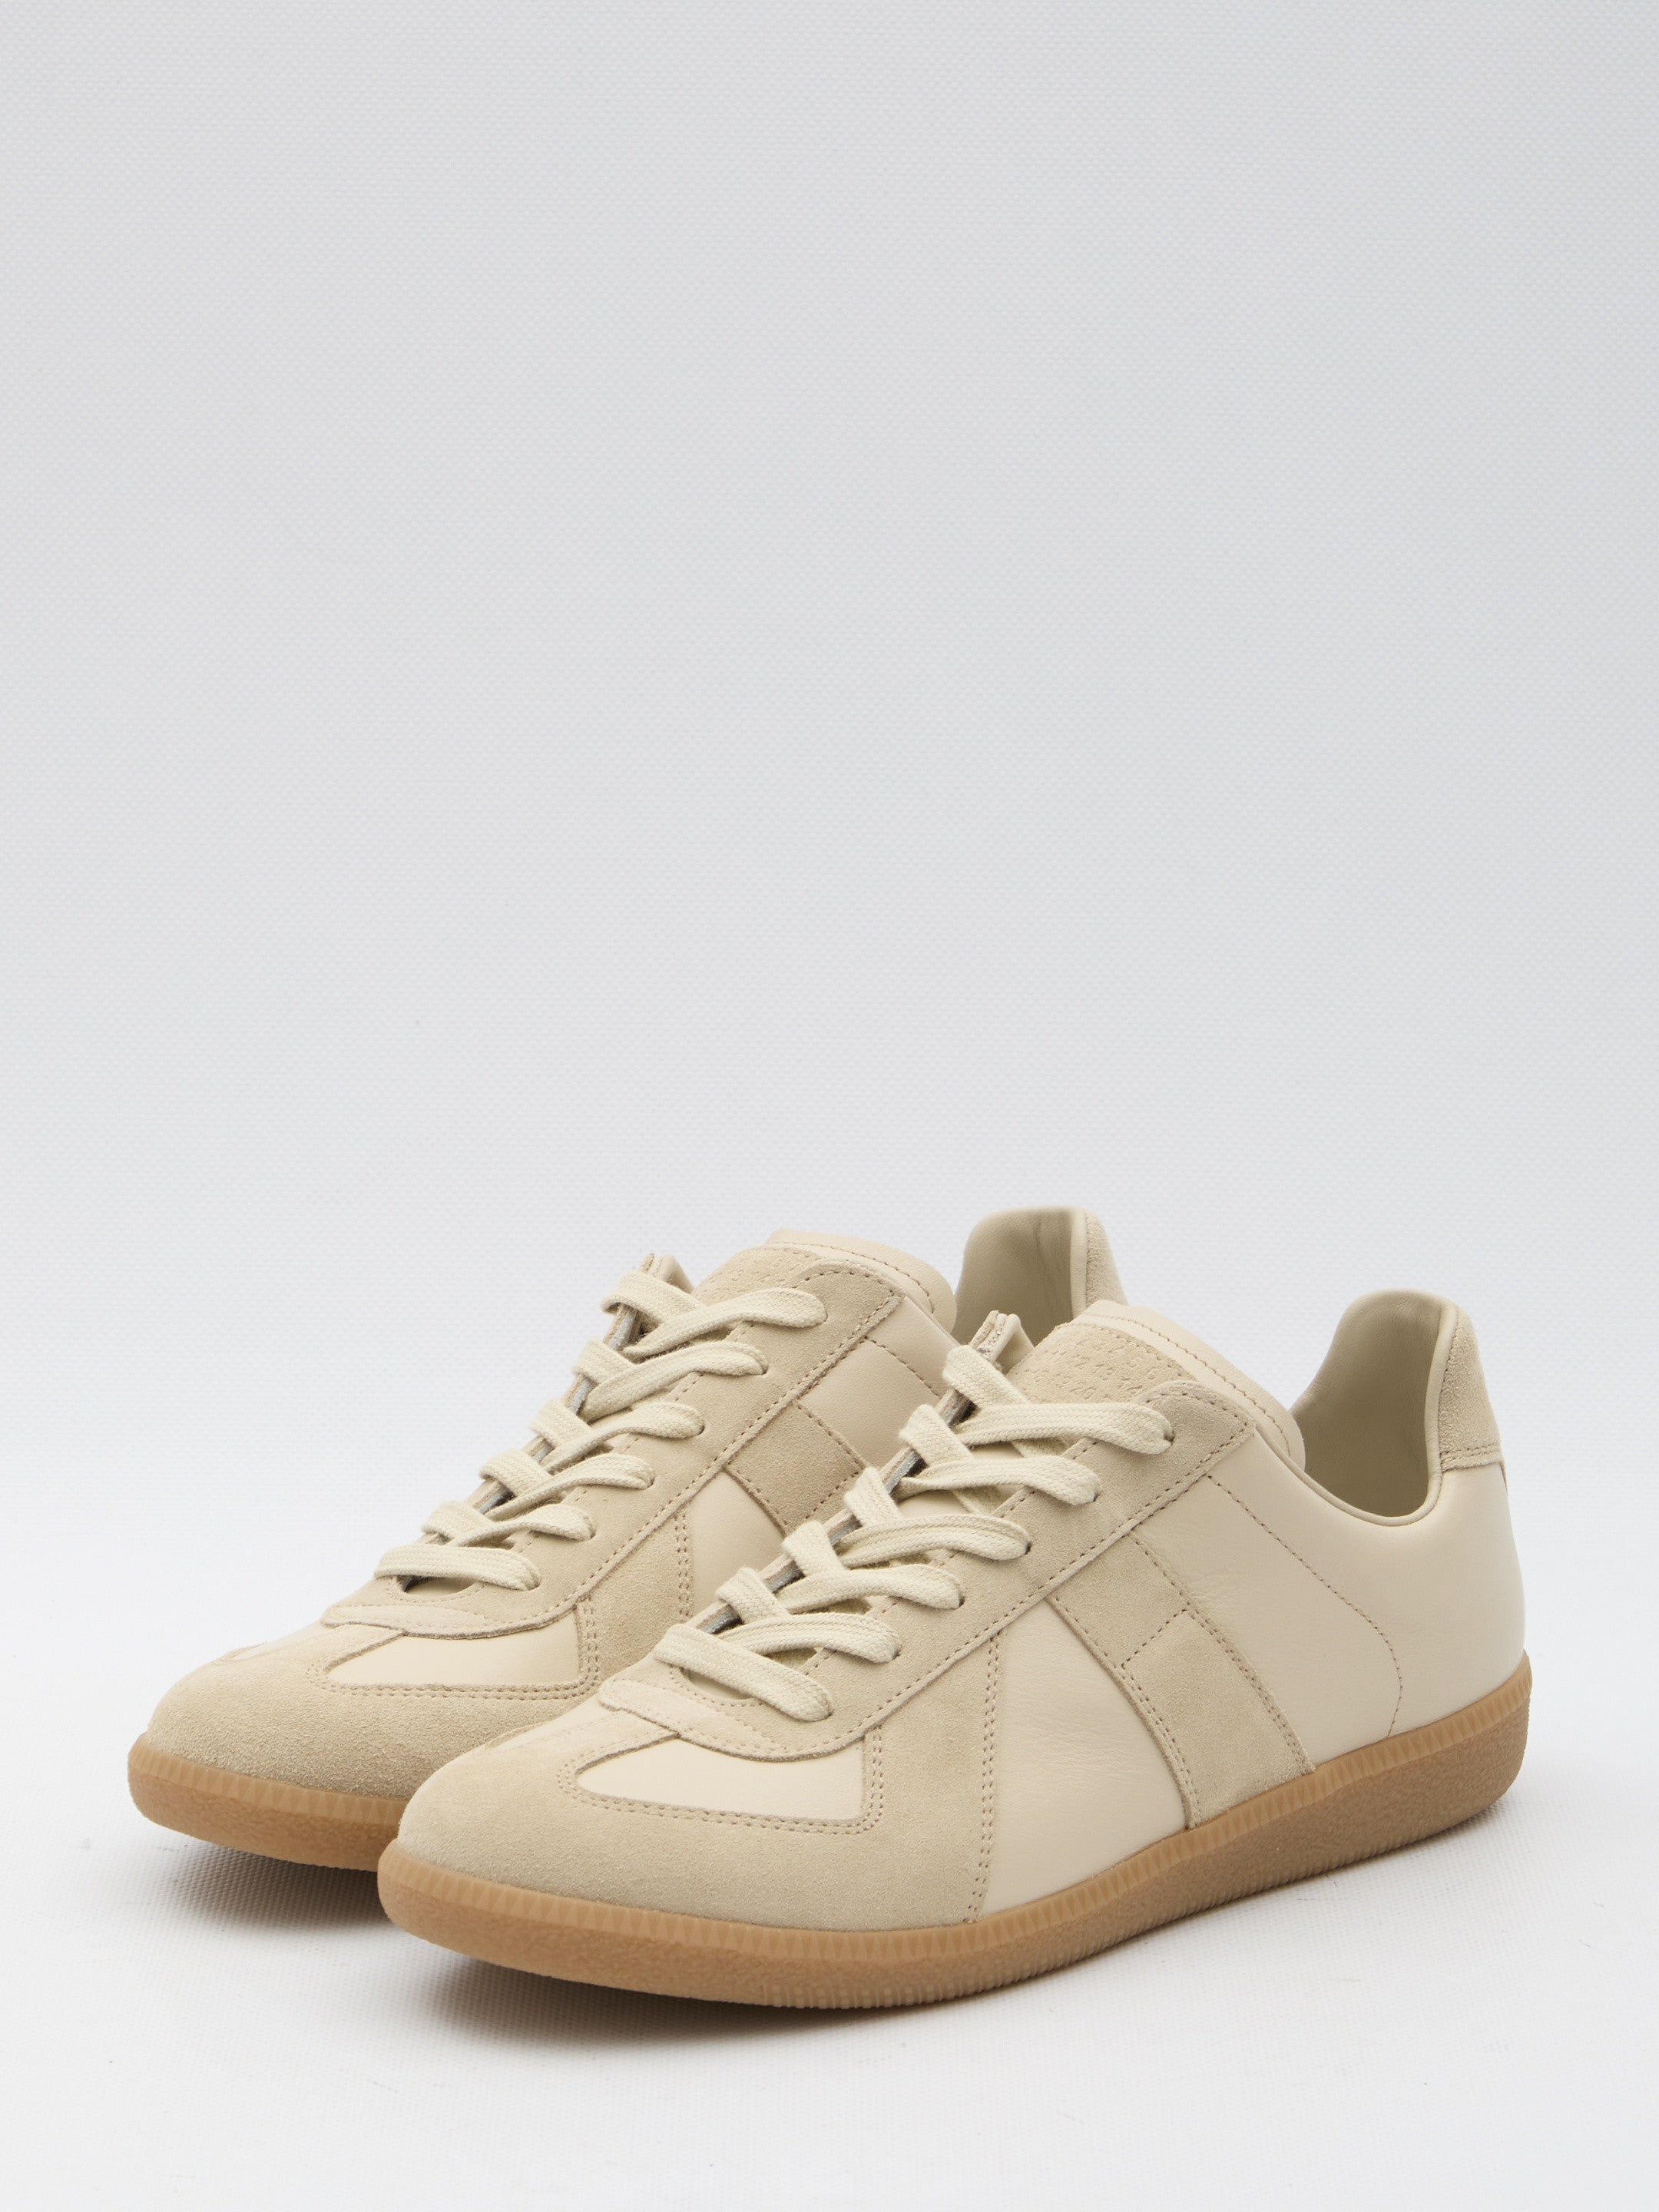 MAISON-MARGIELA-OUTLET-SALE-Replica-sneakers-Sneakers-ARCHIVE-COLLECTION-2_4b267b5e-c0be-45d5-817e-1ee873ddd791.jpg